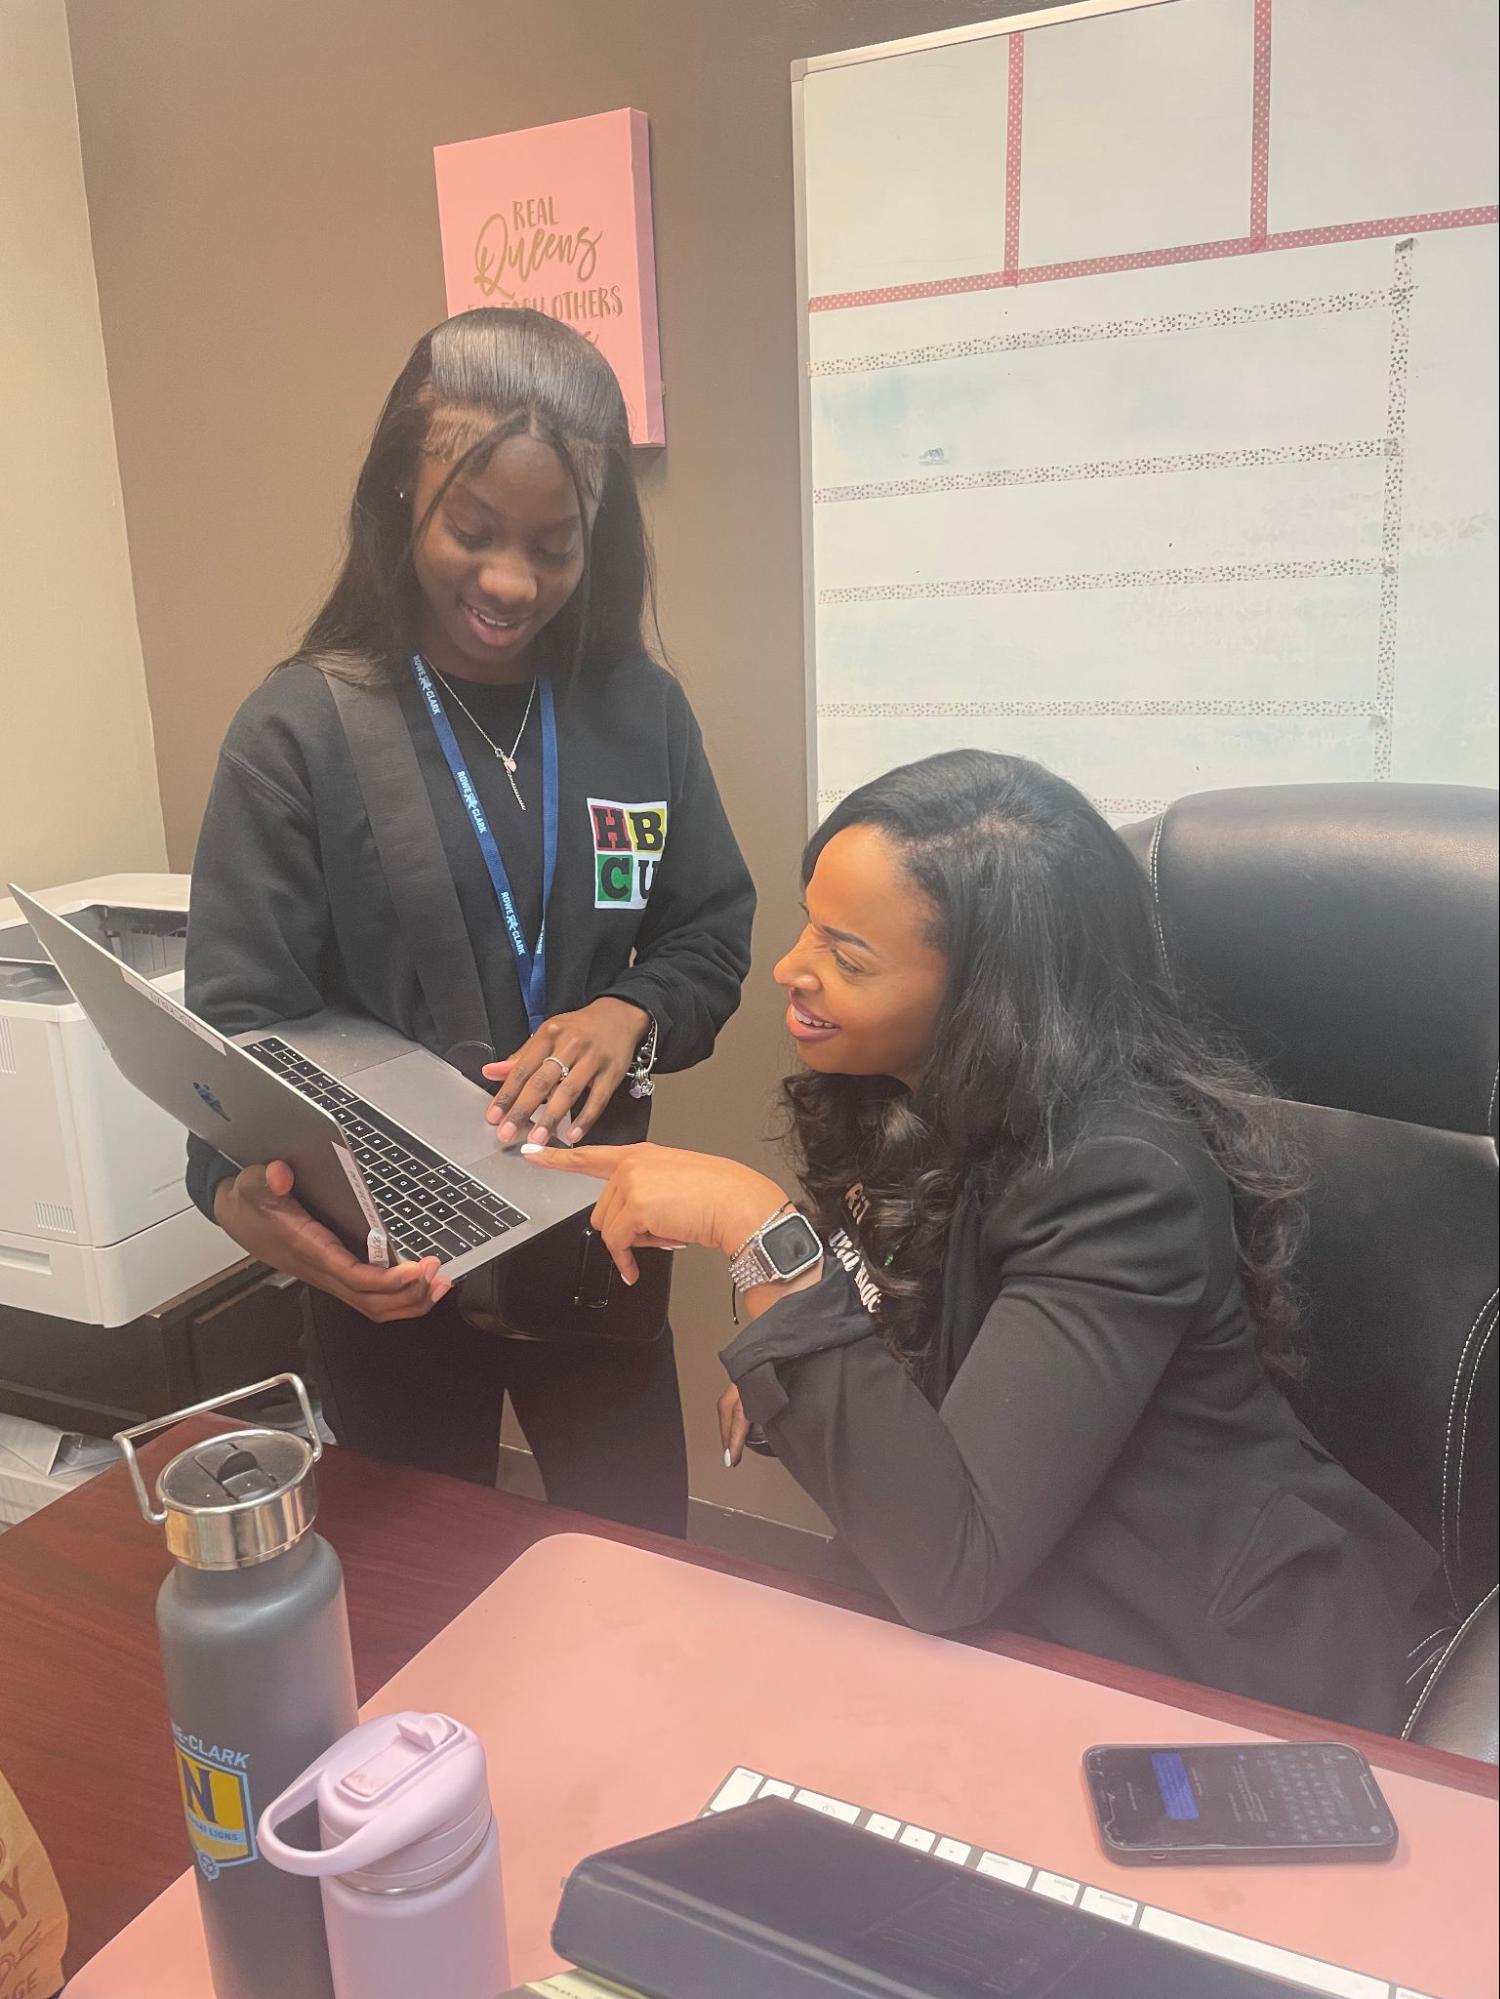 In this photo, Makya, a student, is standing behind a desk and showing what is on her laptop screen to her principal, Miracle Moss. Principal Moss is a Black woman with long, wavy black hair who is wearing a black blazer and is sitting in a black office chair. She is pointing at Makya's laptop as Makya stands beside her at her desk, holding her laptop.